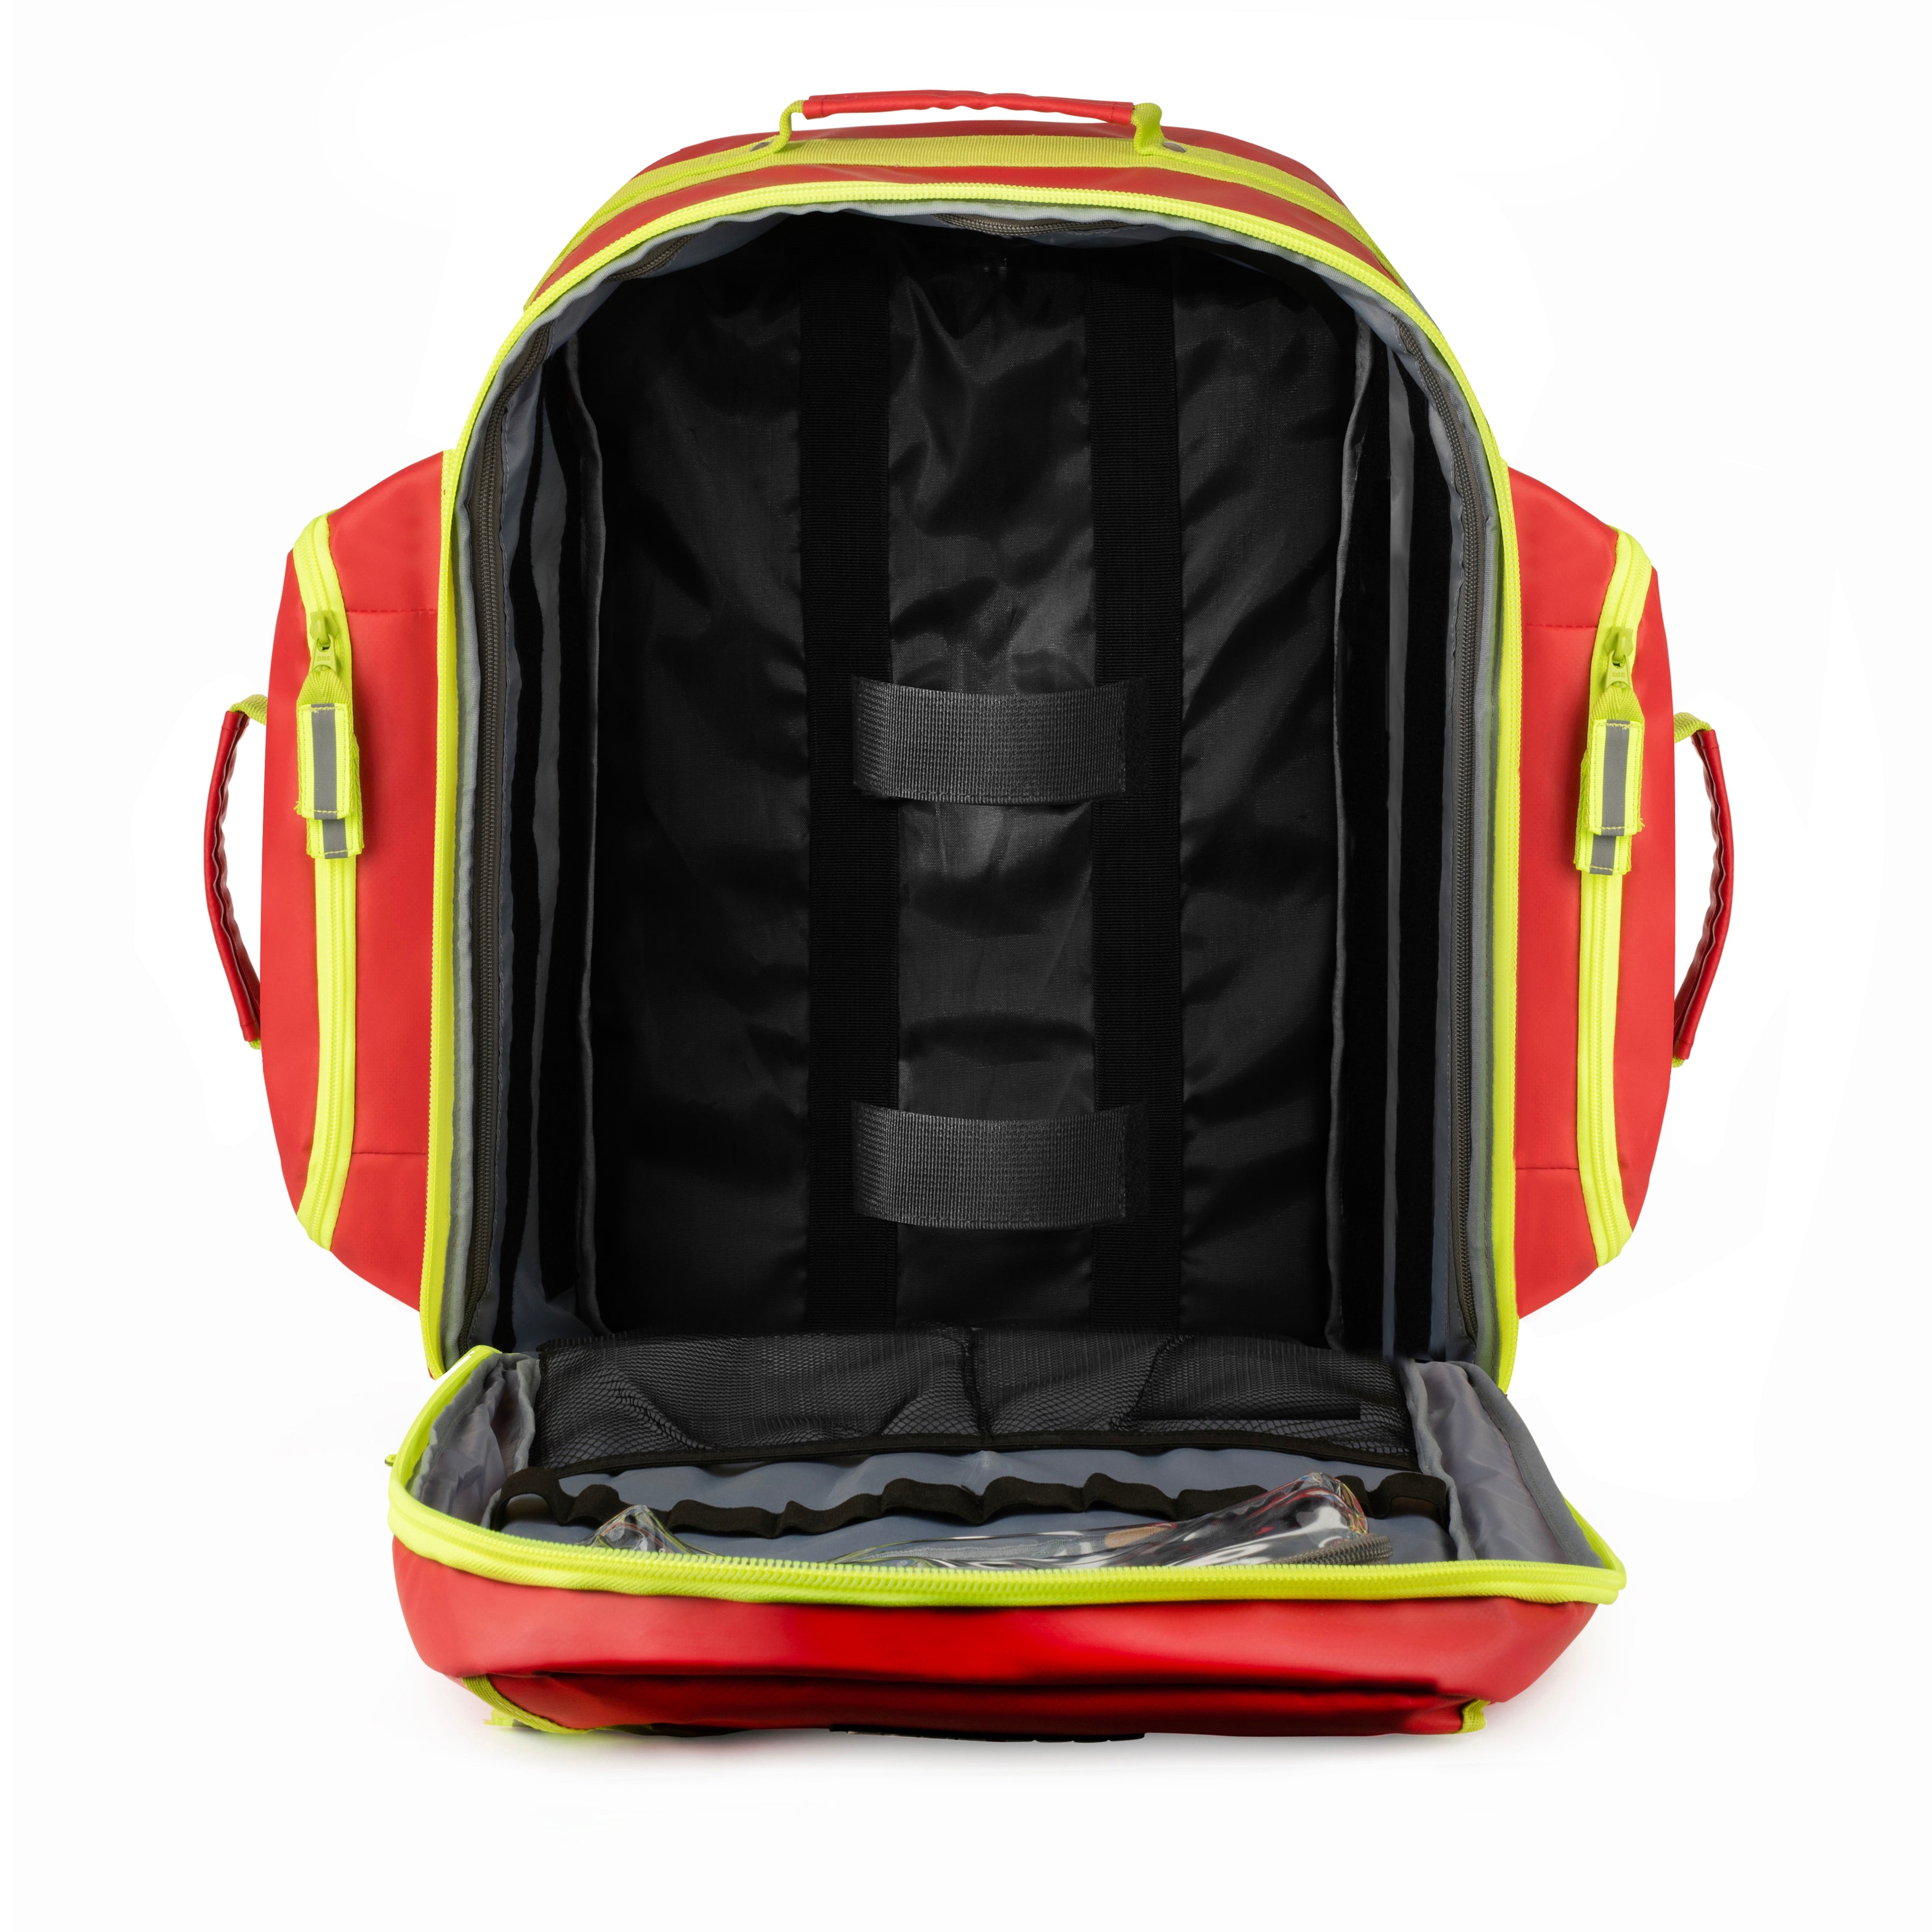 Scherber Ultimate First Responder Trauma O2 Backpack - Fully Stocked